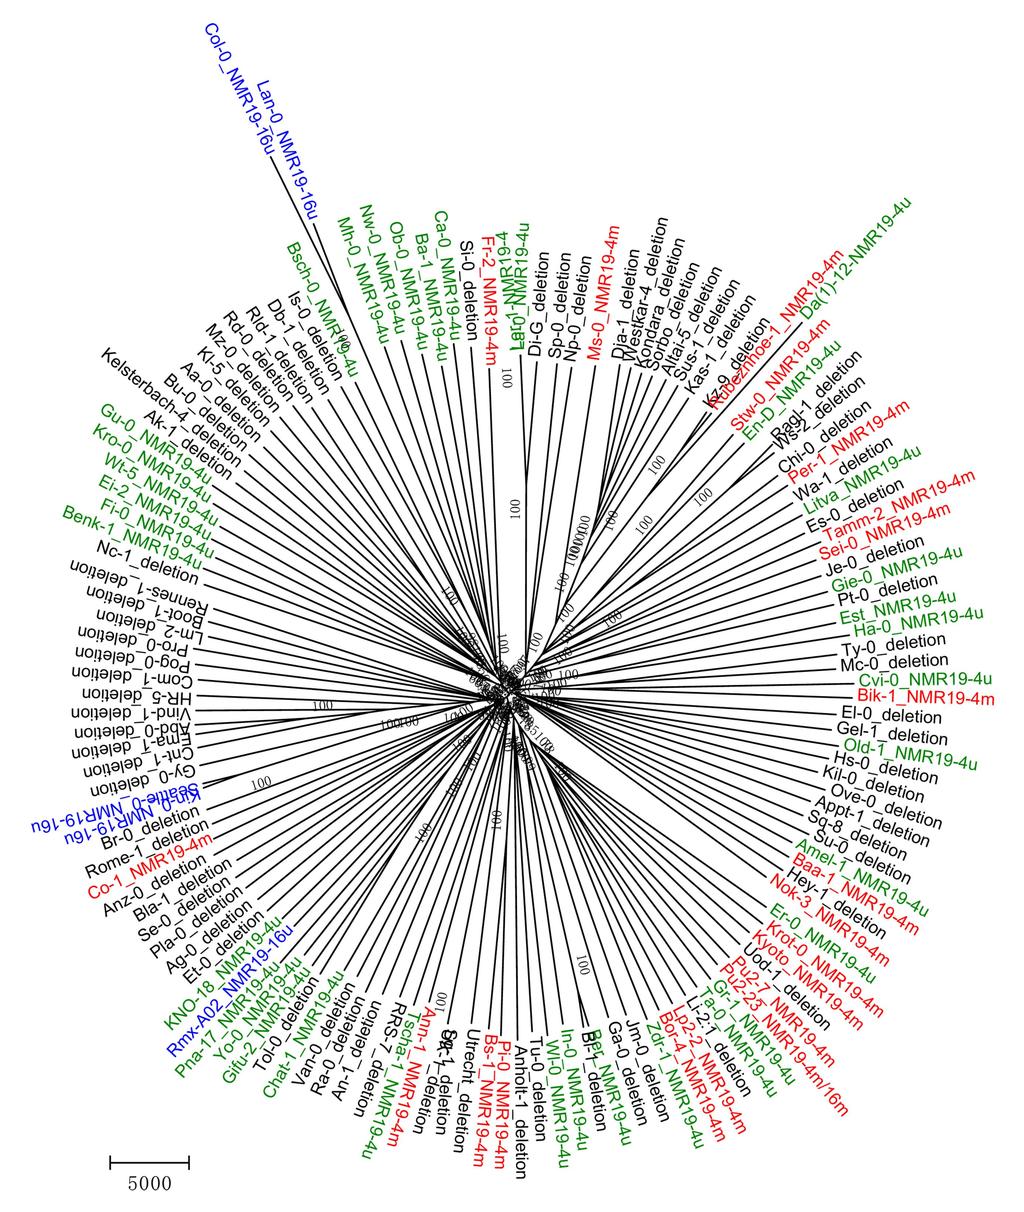 Supplementary Figure 6 Phylogenetic tree of Arabidopsis thaliana accessions using genome-wide single nucleotide polymorphism data.